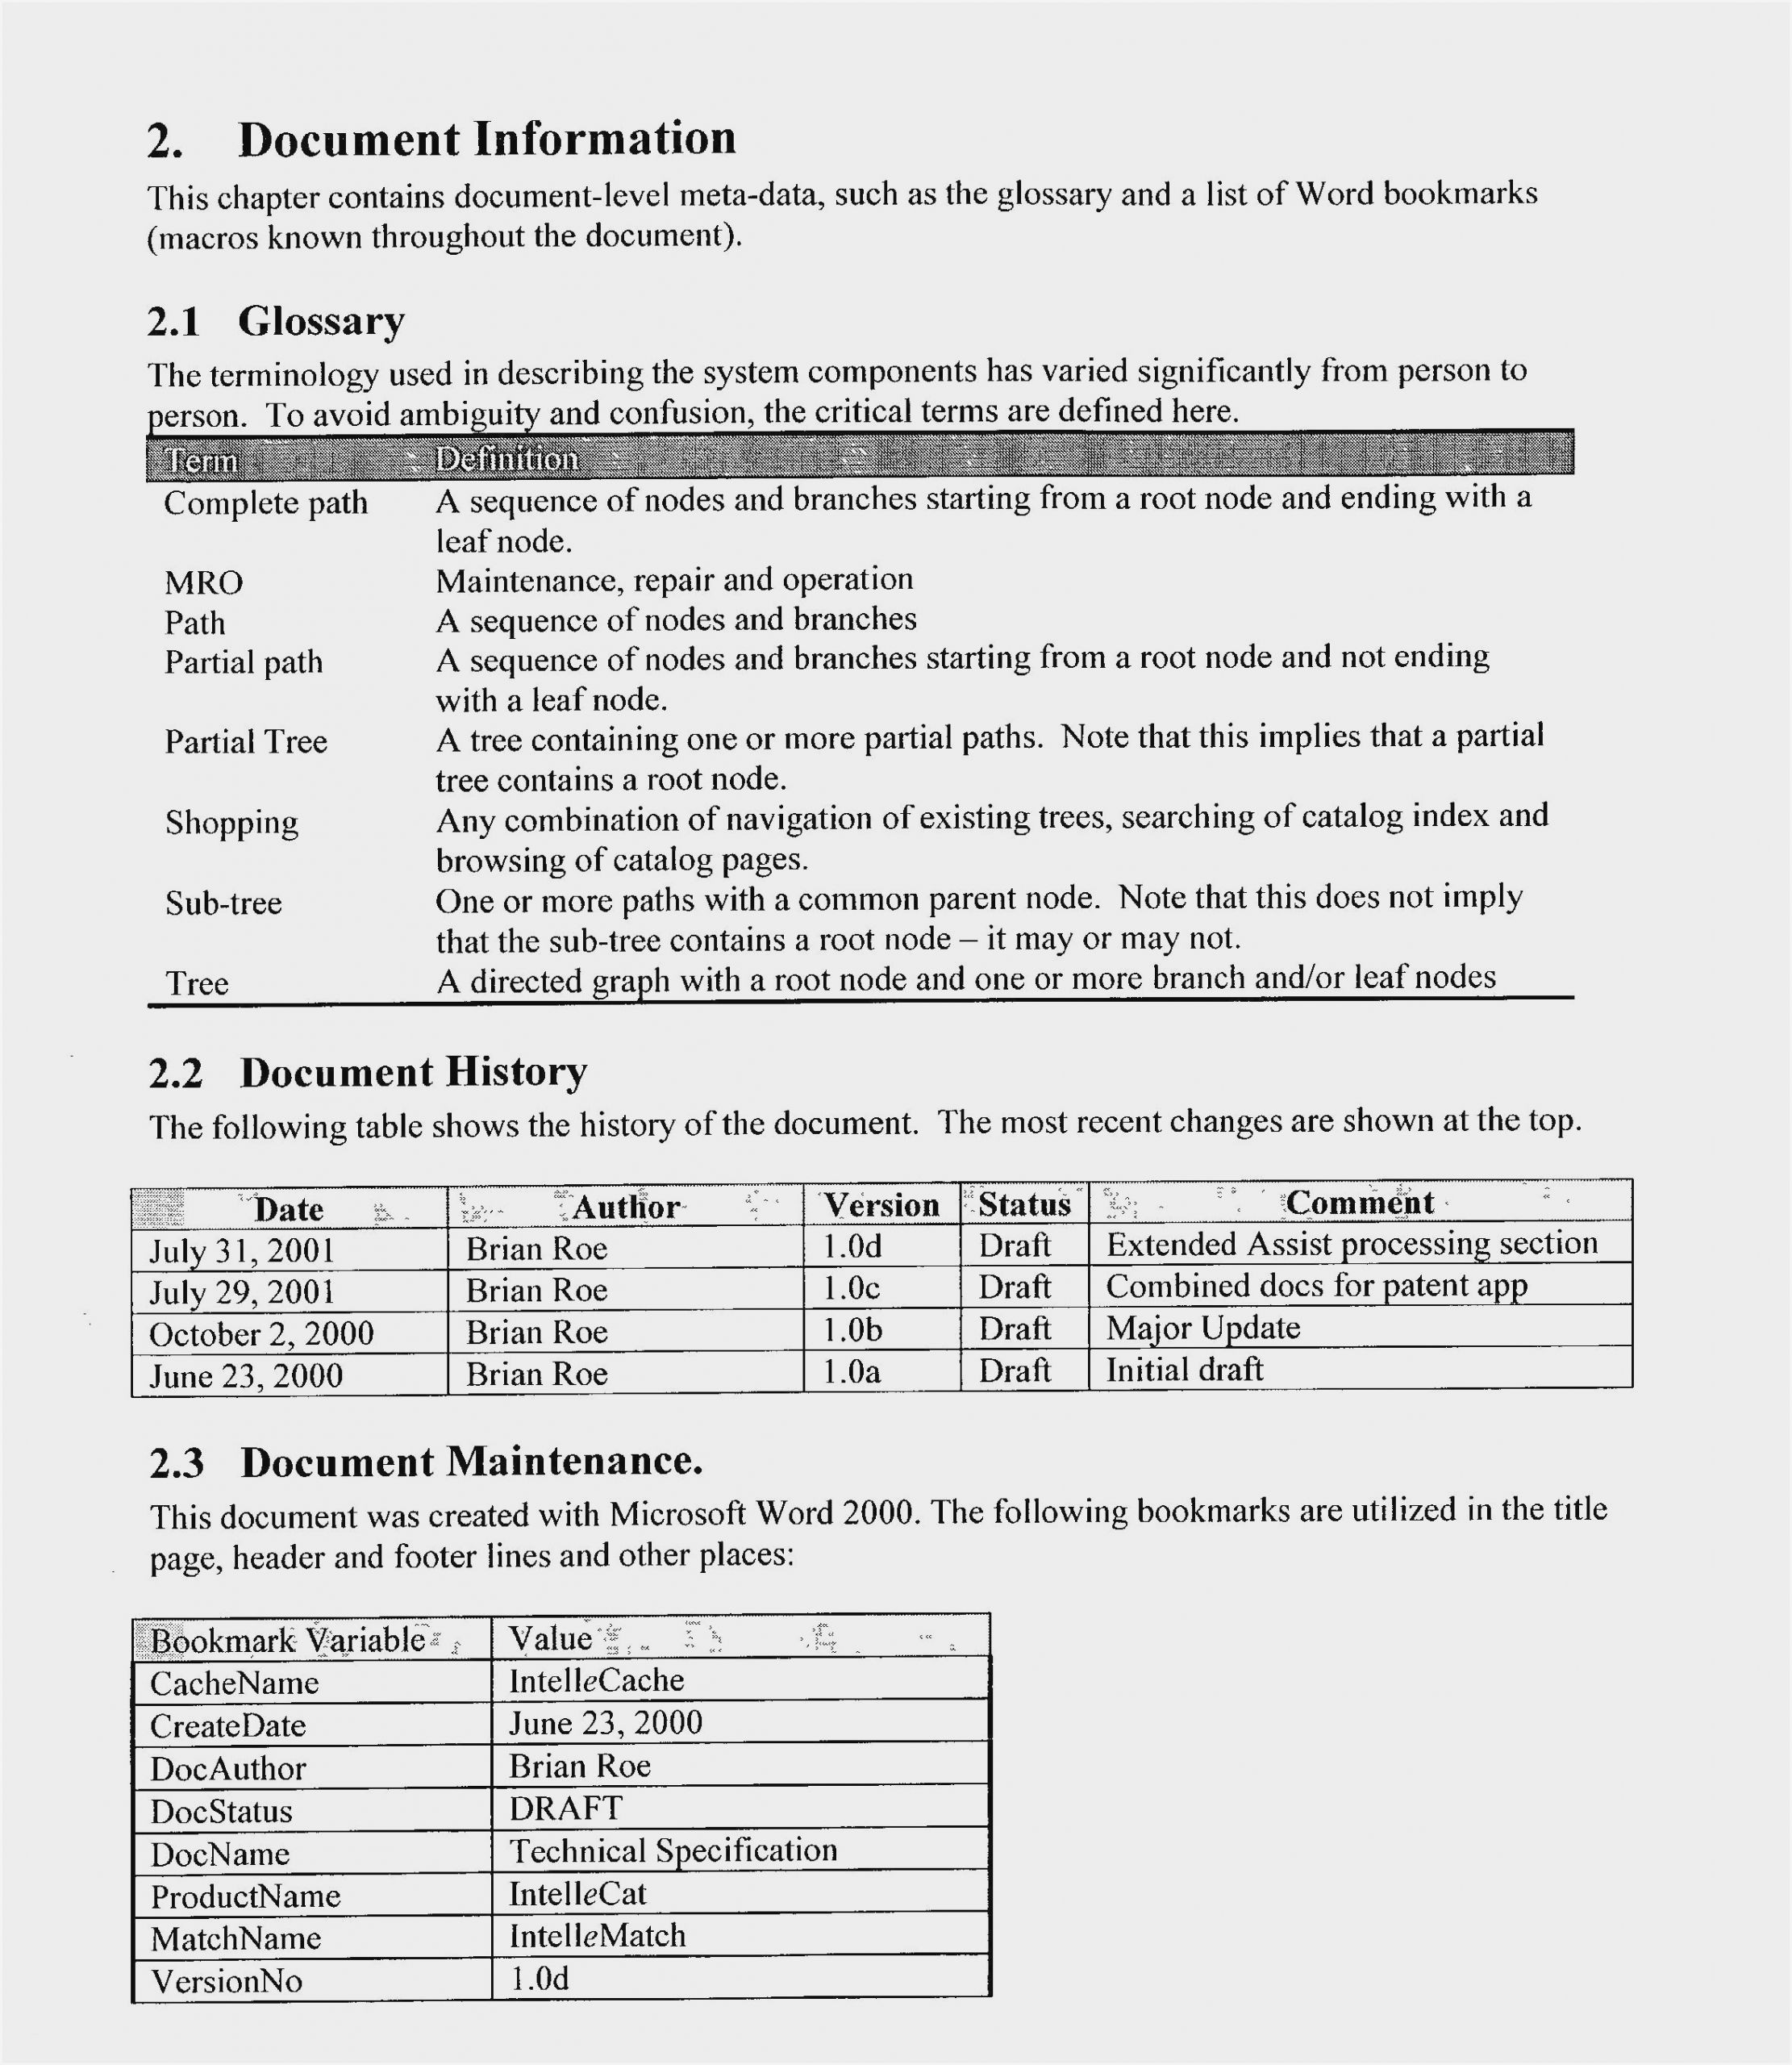 Resume Samples for Mba Freshers Free Download Resume Example